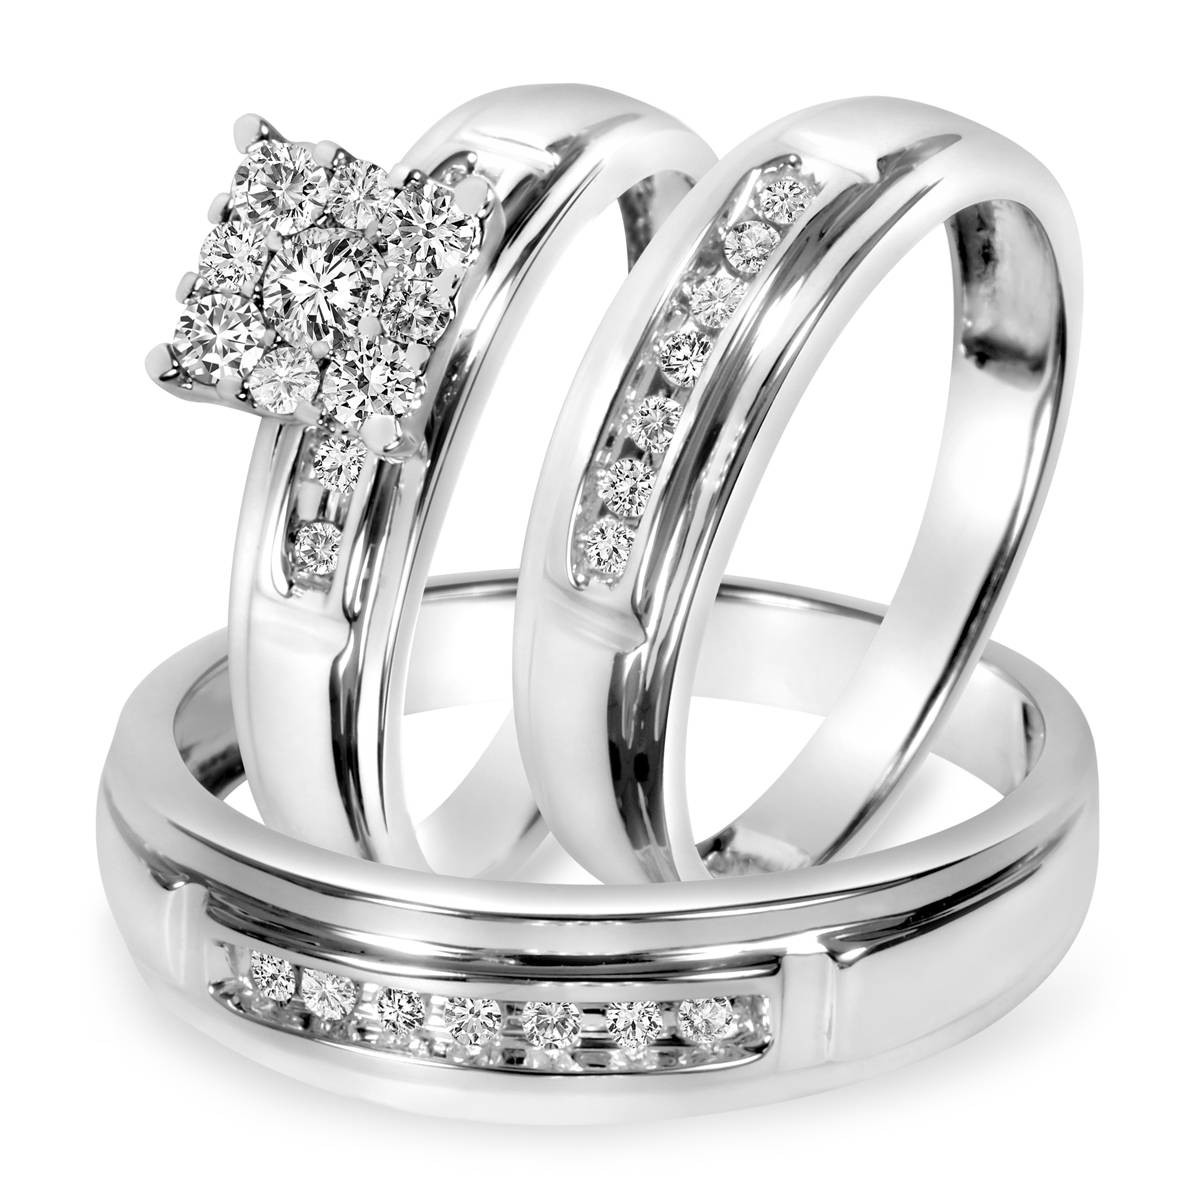 Wedding Rings Sets His And Hers For Cheap
 15 Inspirations of Cheap Wedding Bands Sets His And Hers